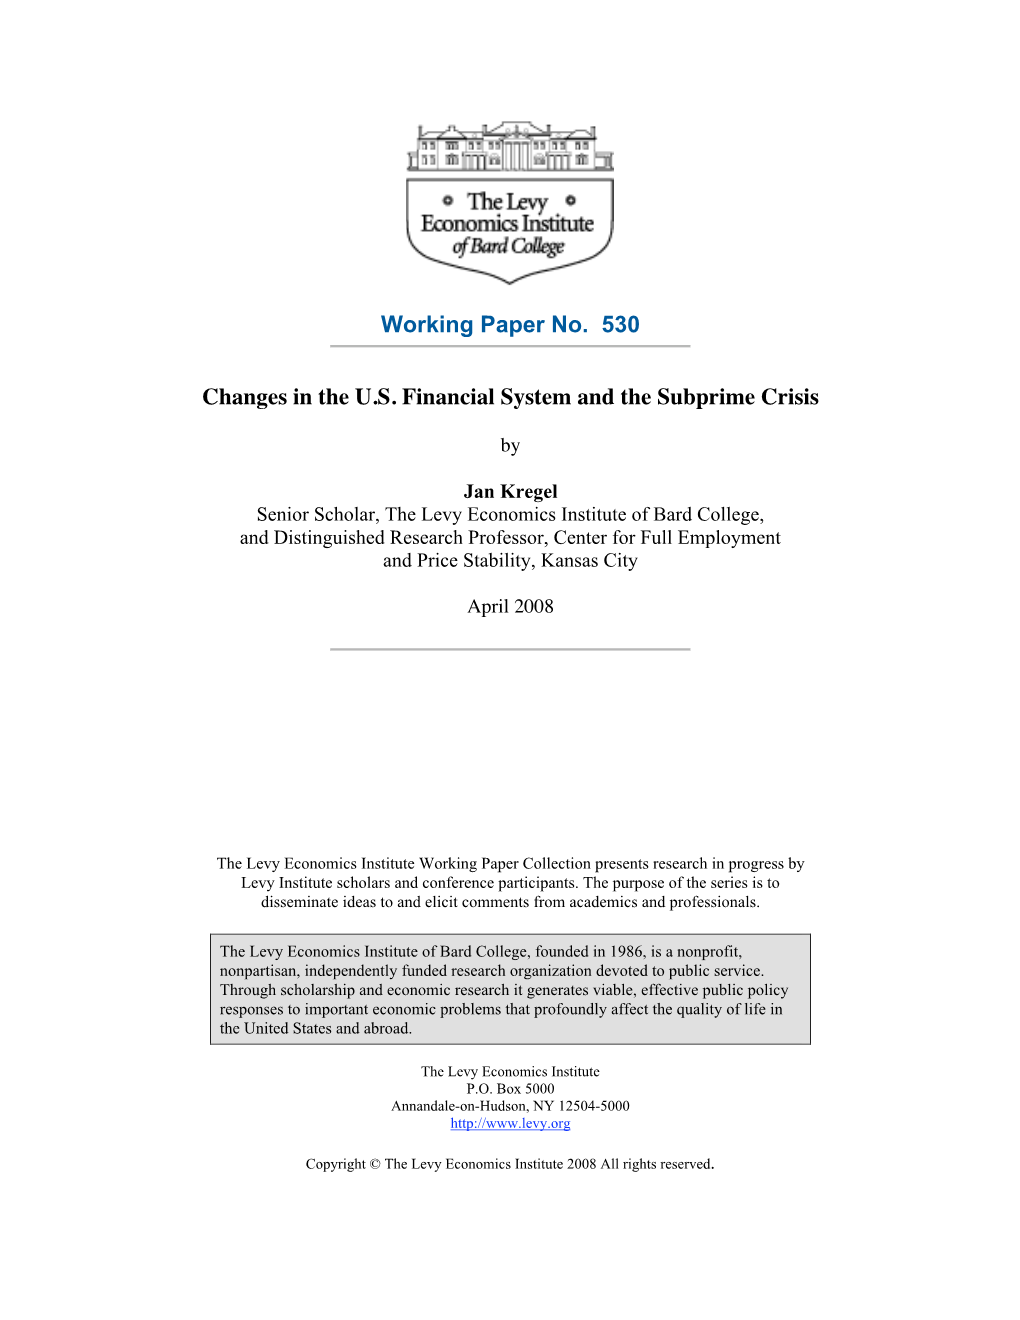 Changes in the U.S. Financial System and the Subprime Crisis